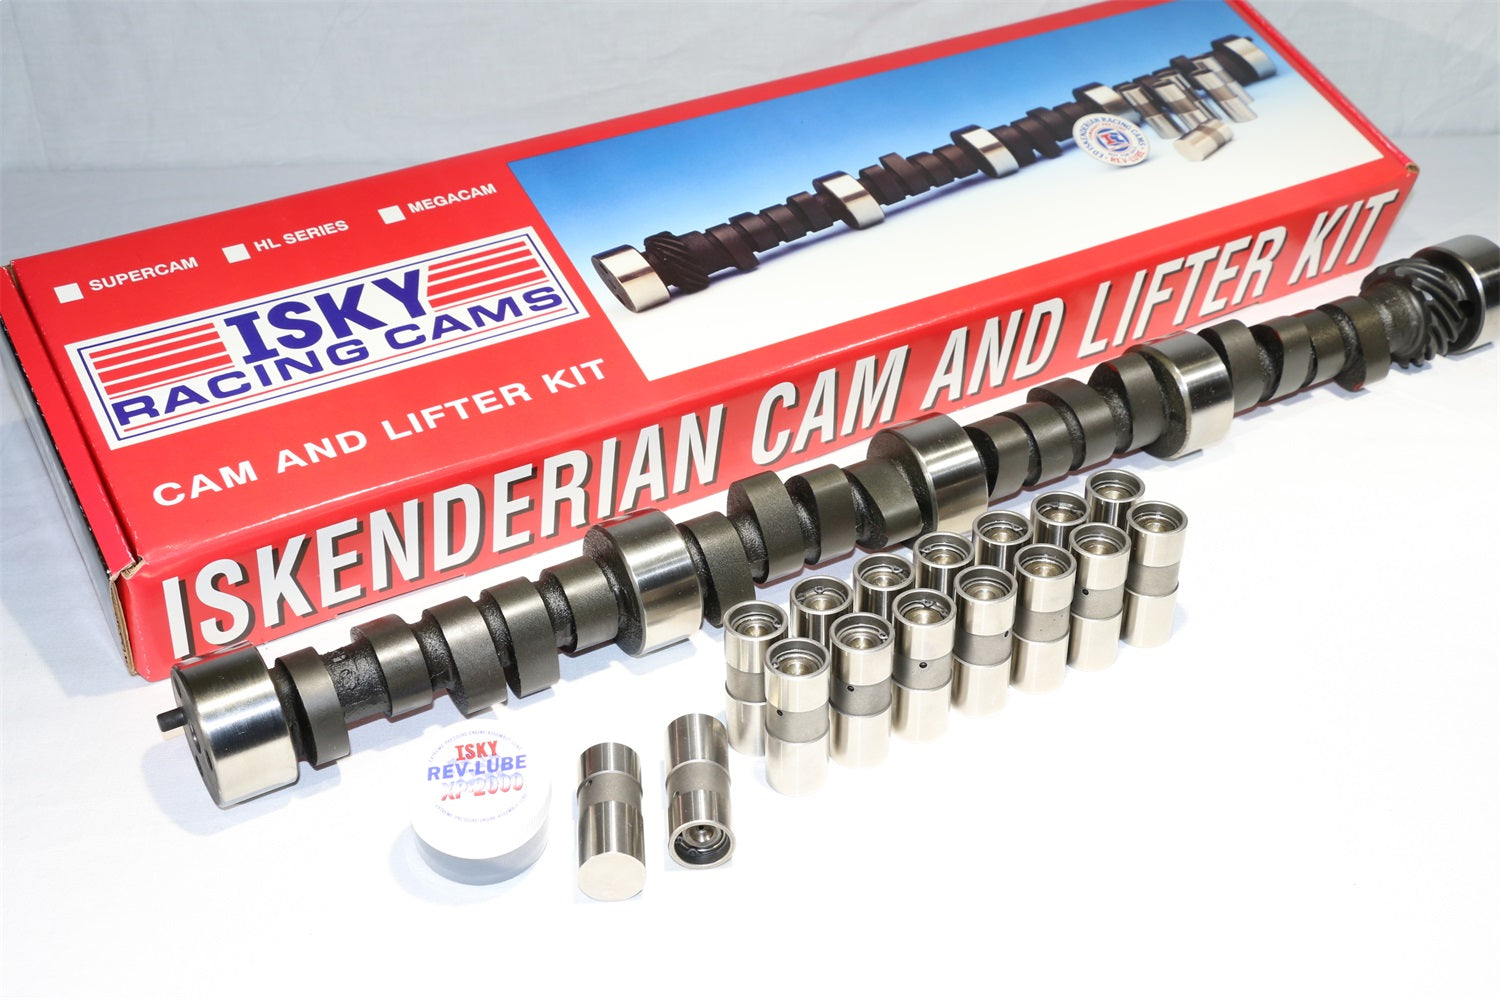 Cam And Lifter Kit, Hyd., Single Bolt, Valve Lift Int/Ext. 00.435, Valve  Lash Hot Int/Ext. 0.000, ADV Duration Int/Ext. 262, 0.050 Duration Int/Ext. 